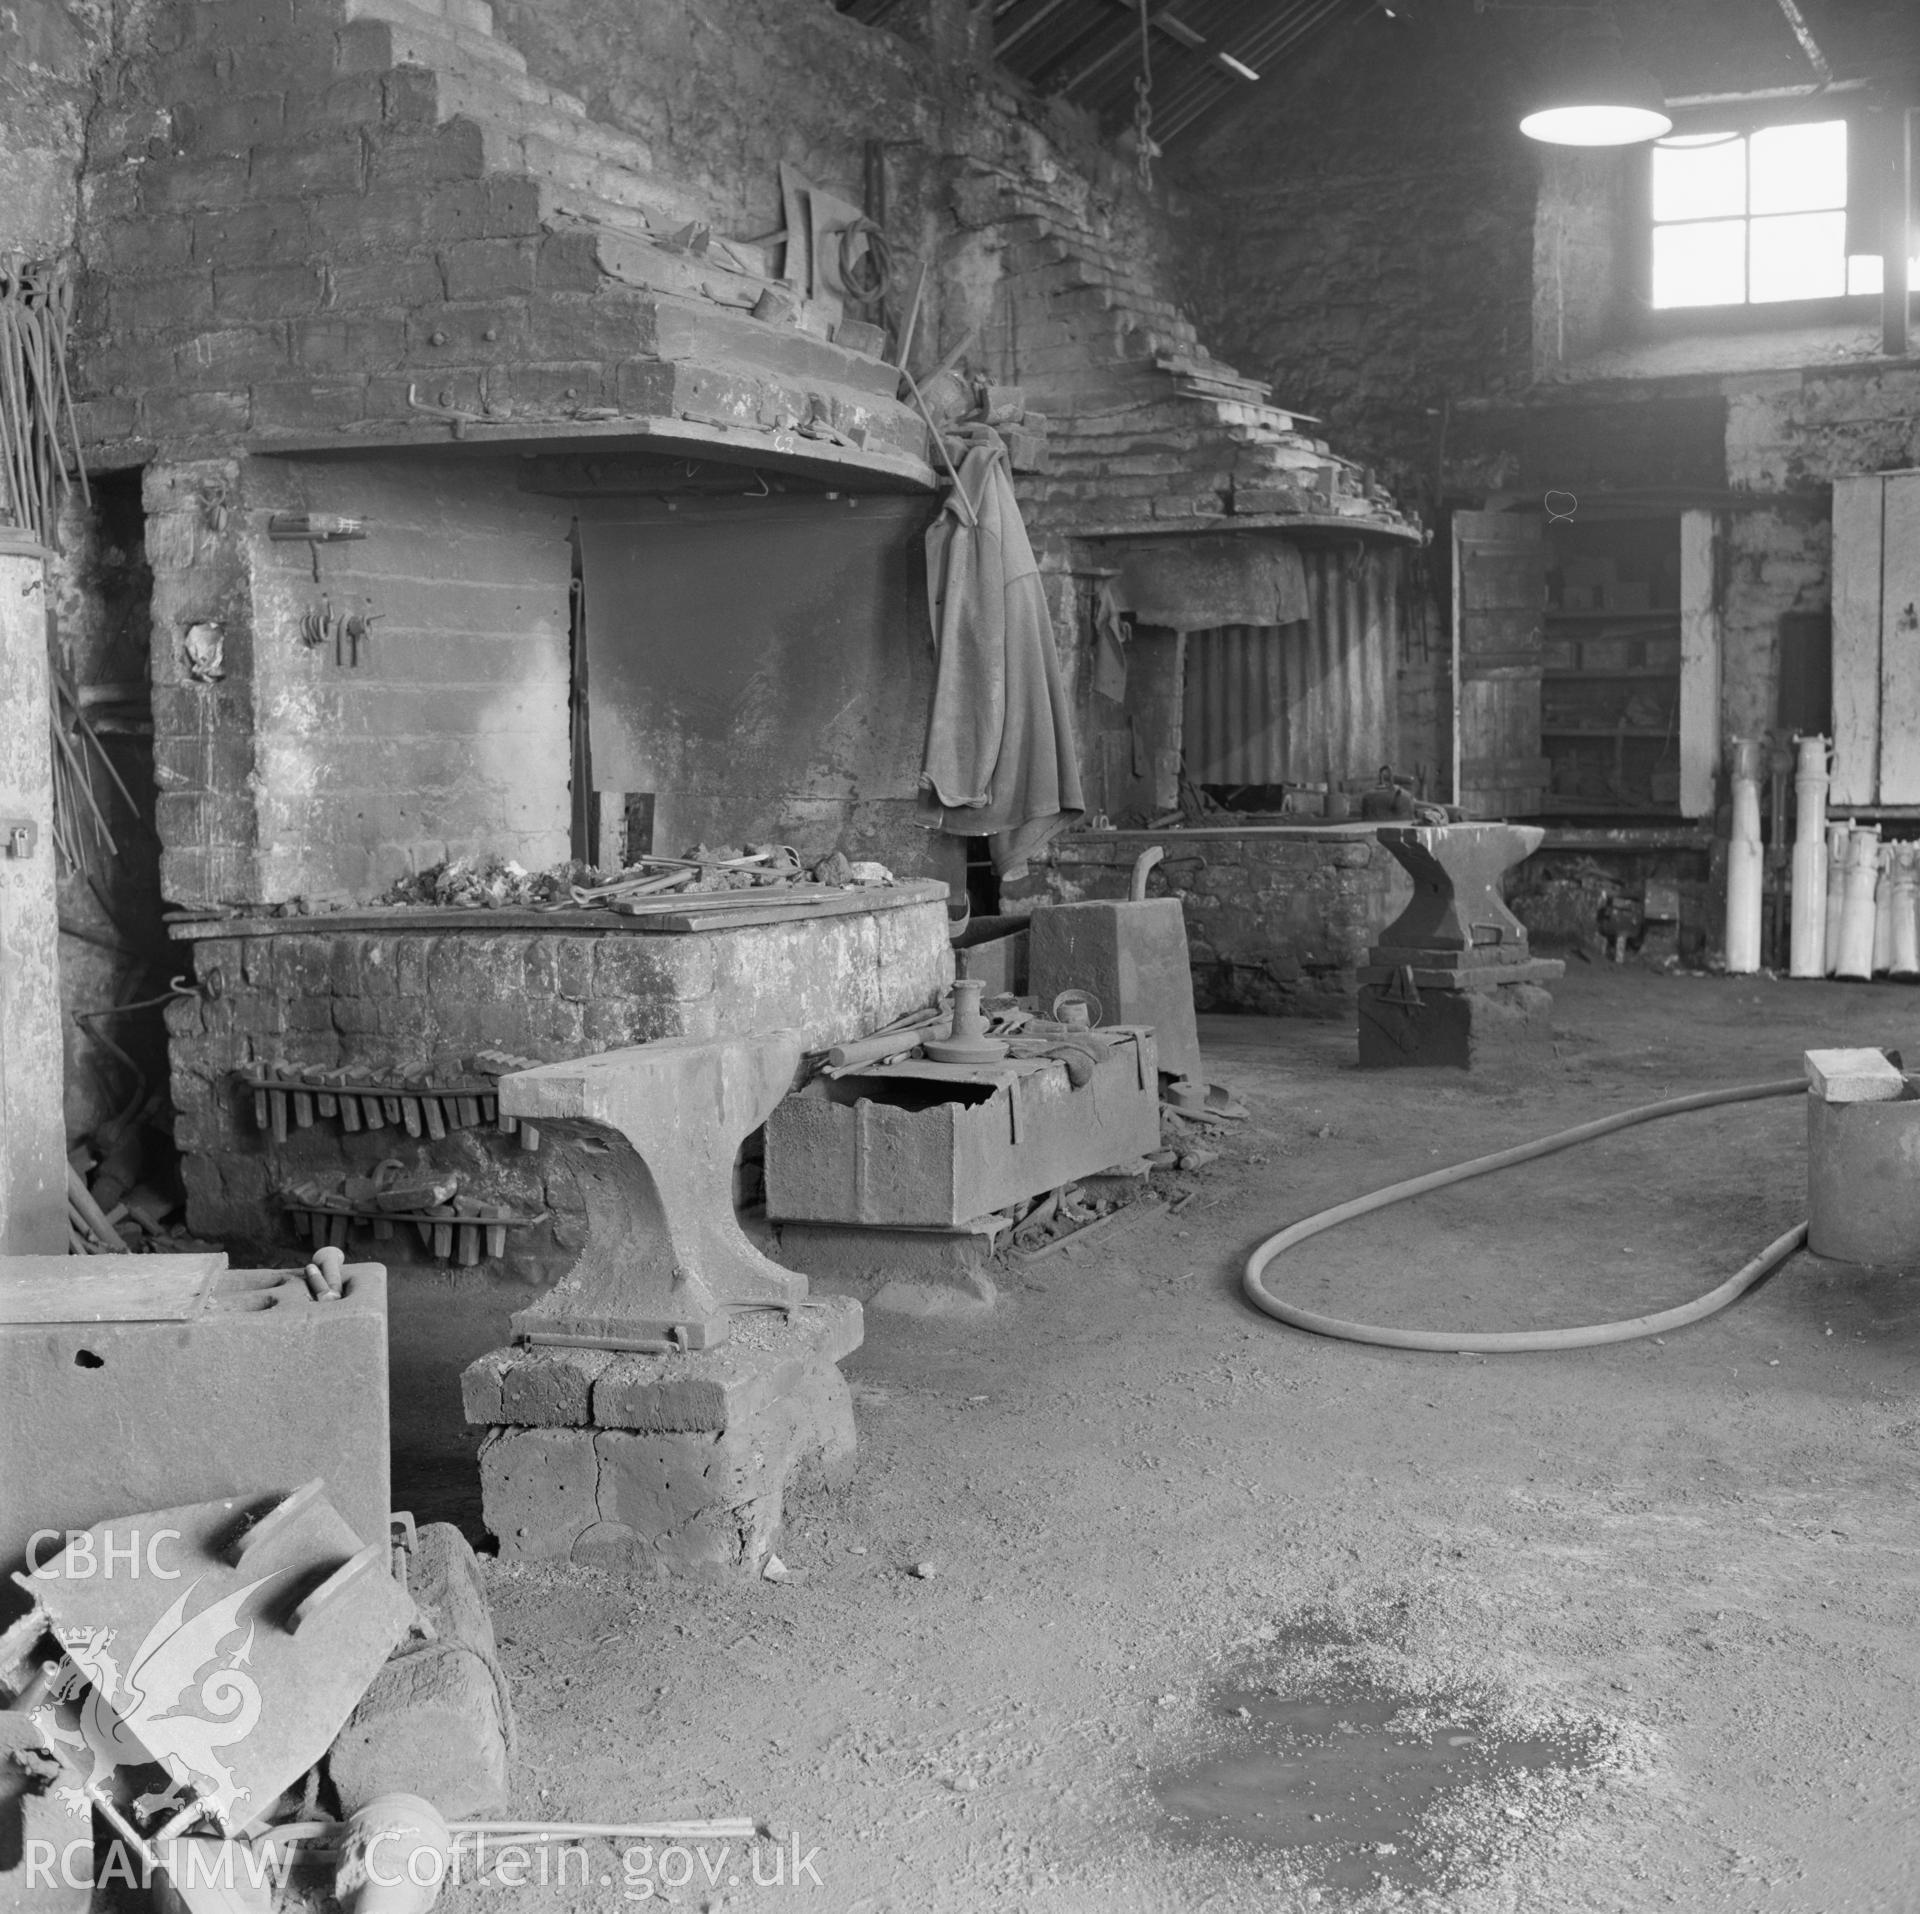 Digital copy of an acetate negative showing blacksmiths shop and forge at Big Pit, from the John Cornwell Collection.